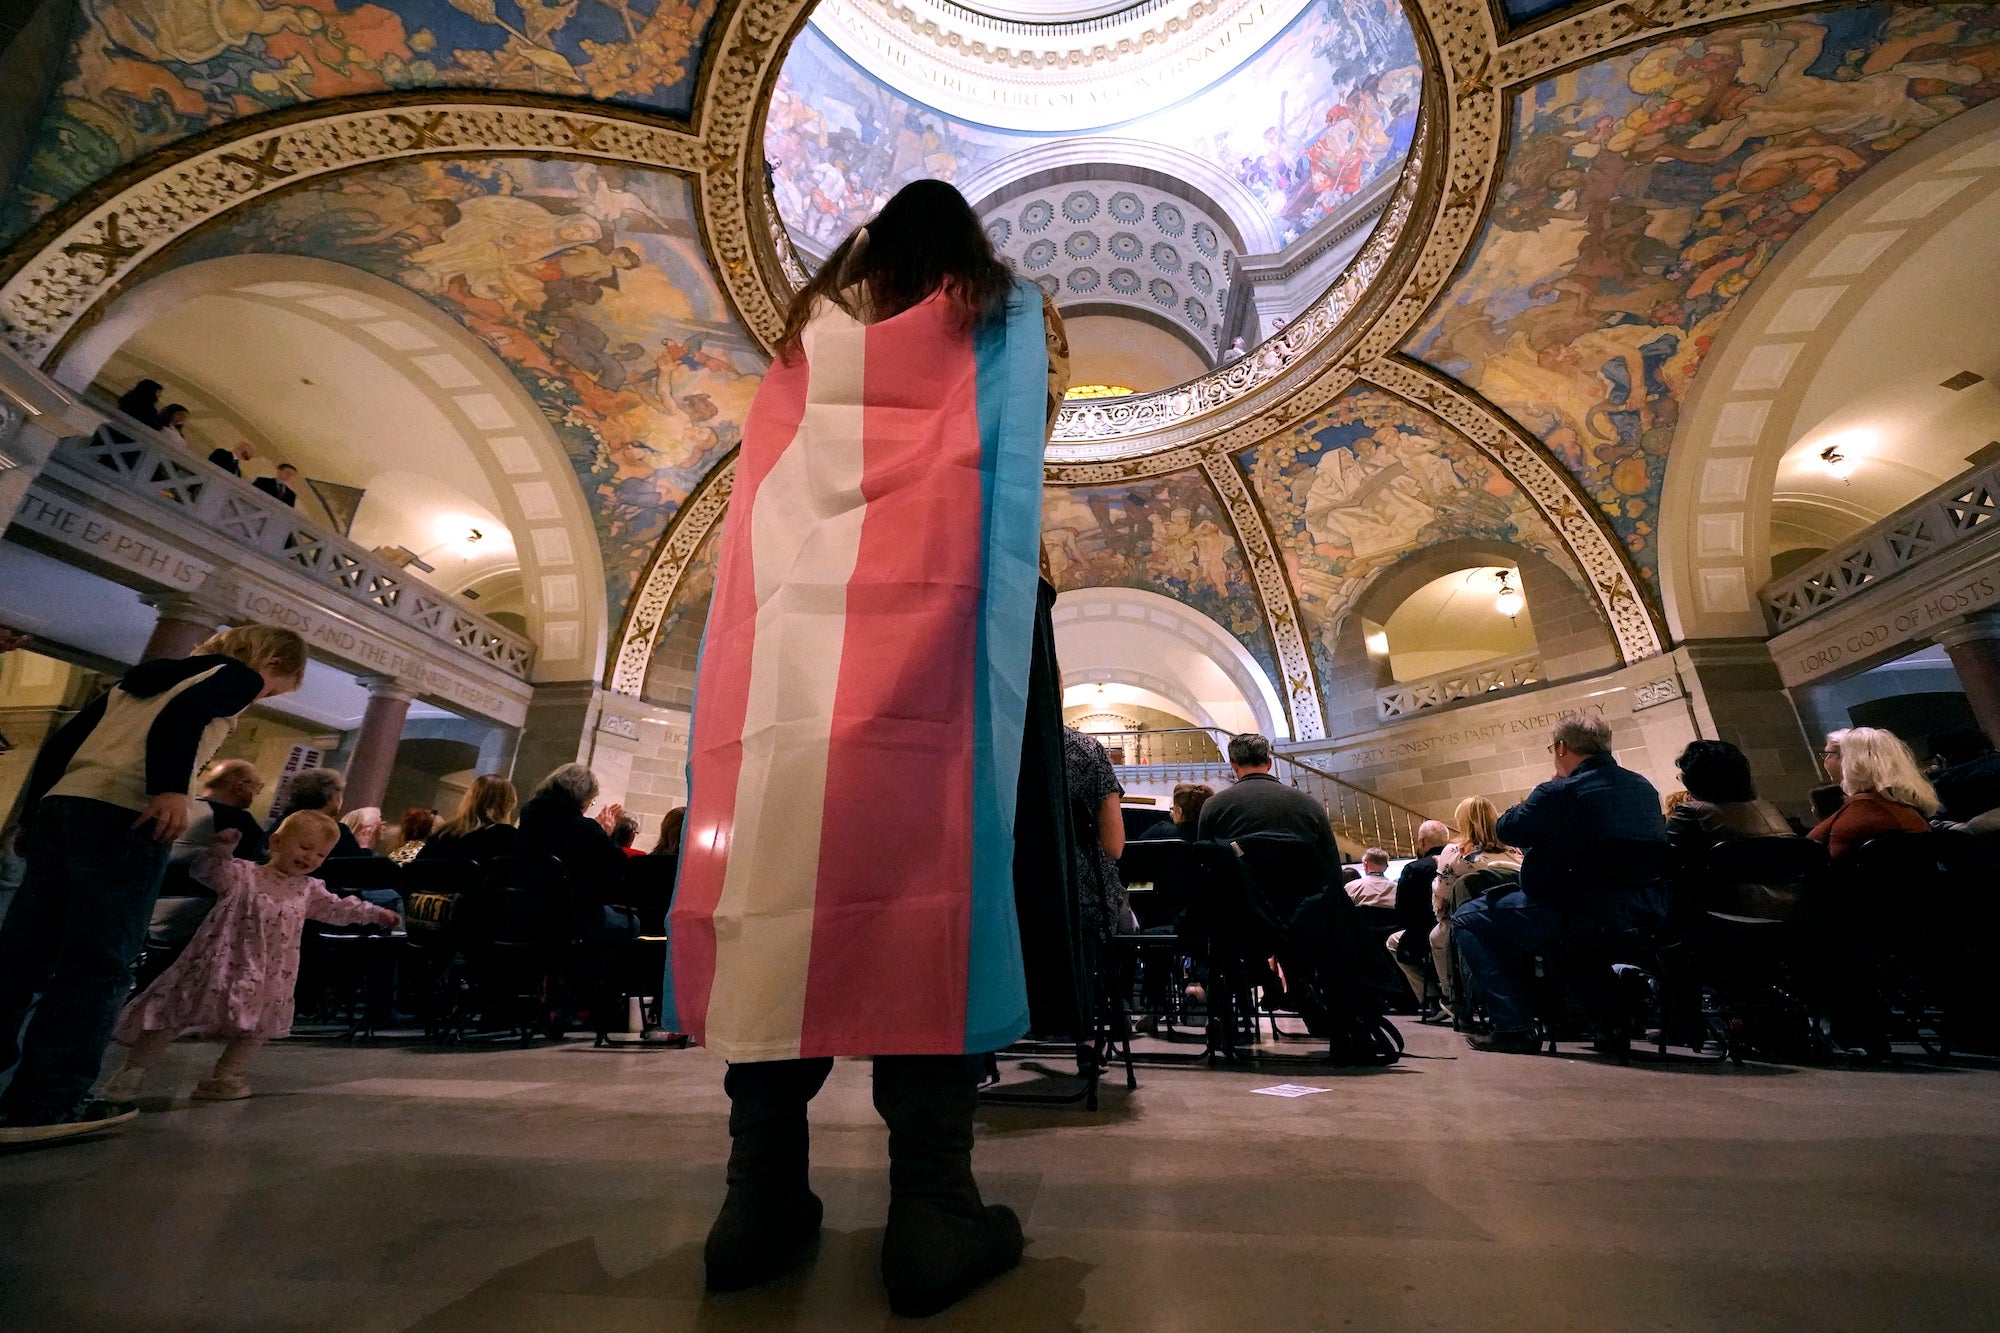 An activist wears a the transgender pride flag as a counter protest during a rally in favor of a ban on gender-affirming health care legislation at the Missouri Statehouse in Jefferson, US, March 20, 2023.